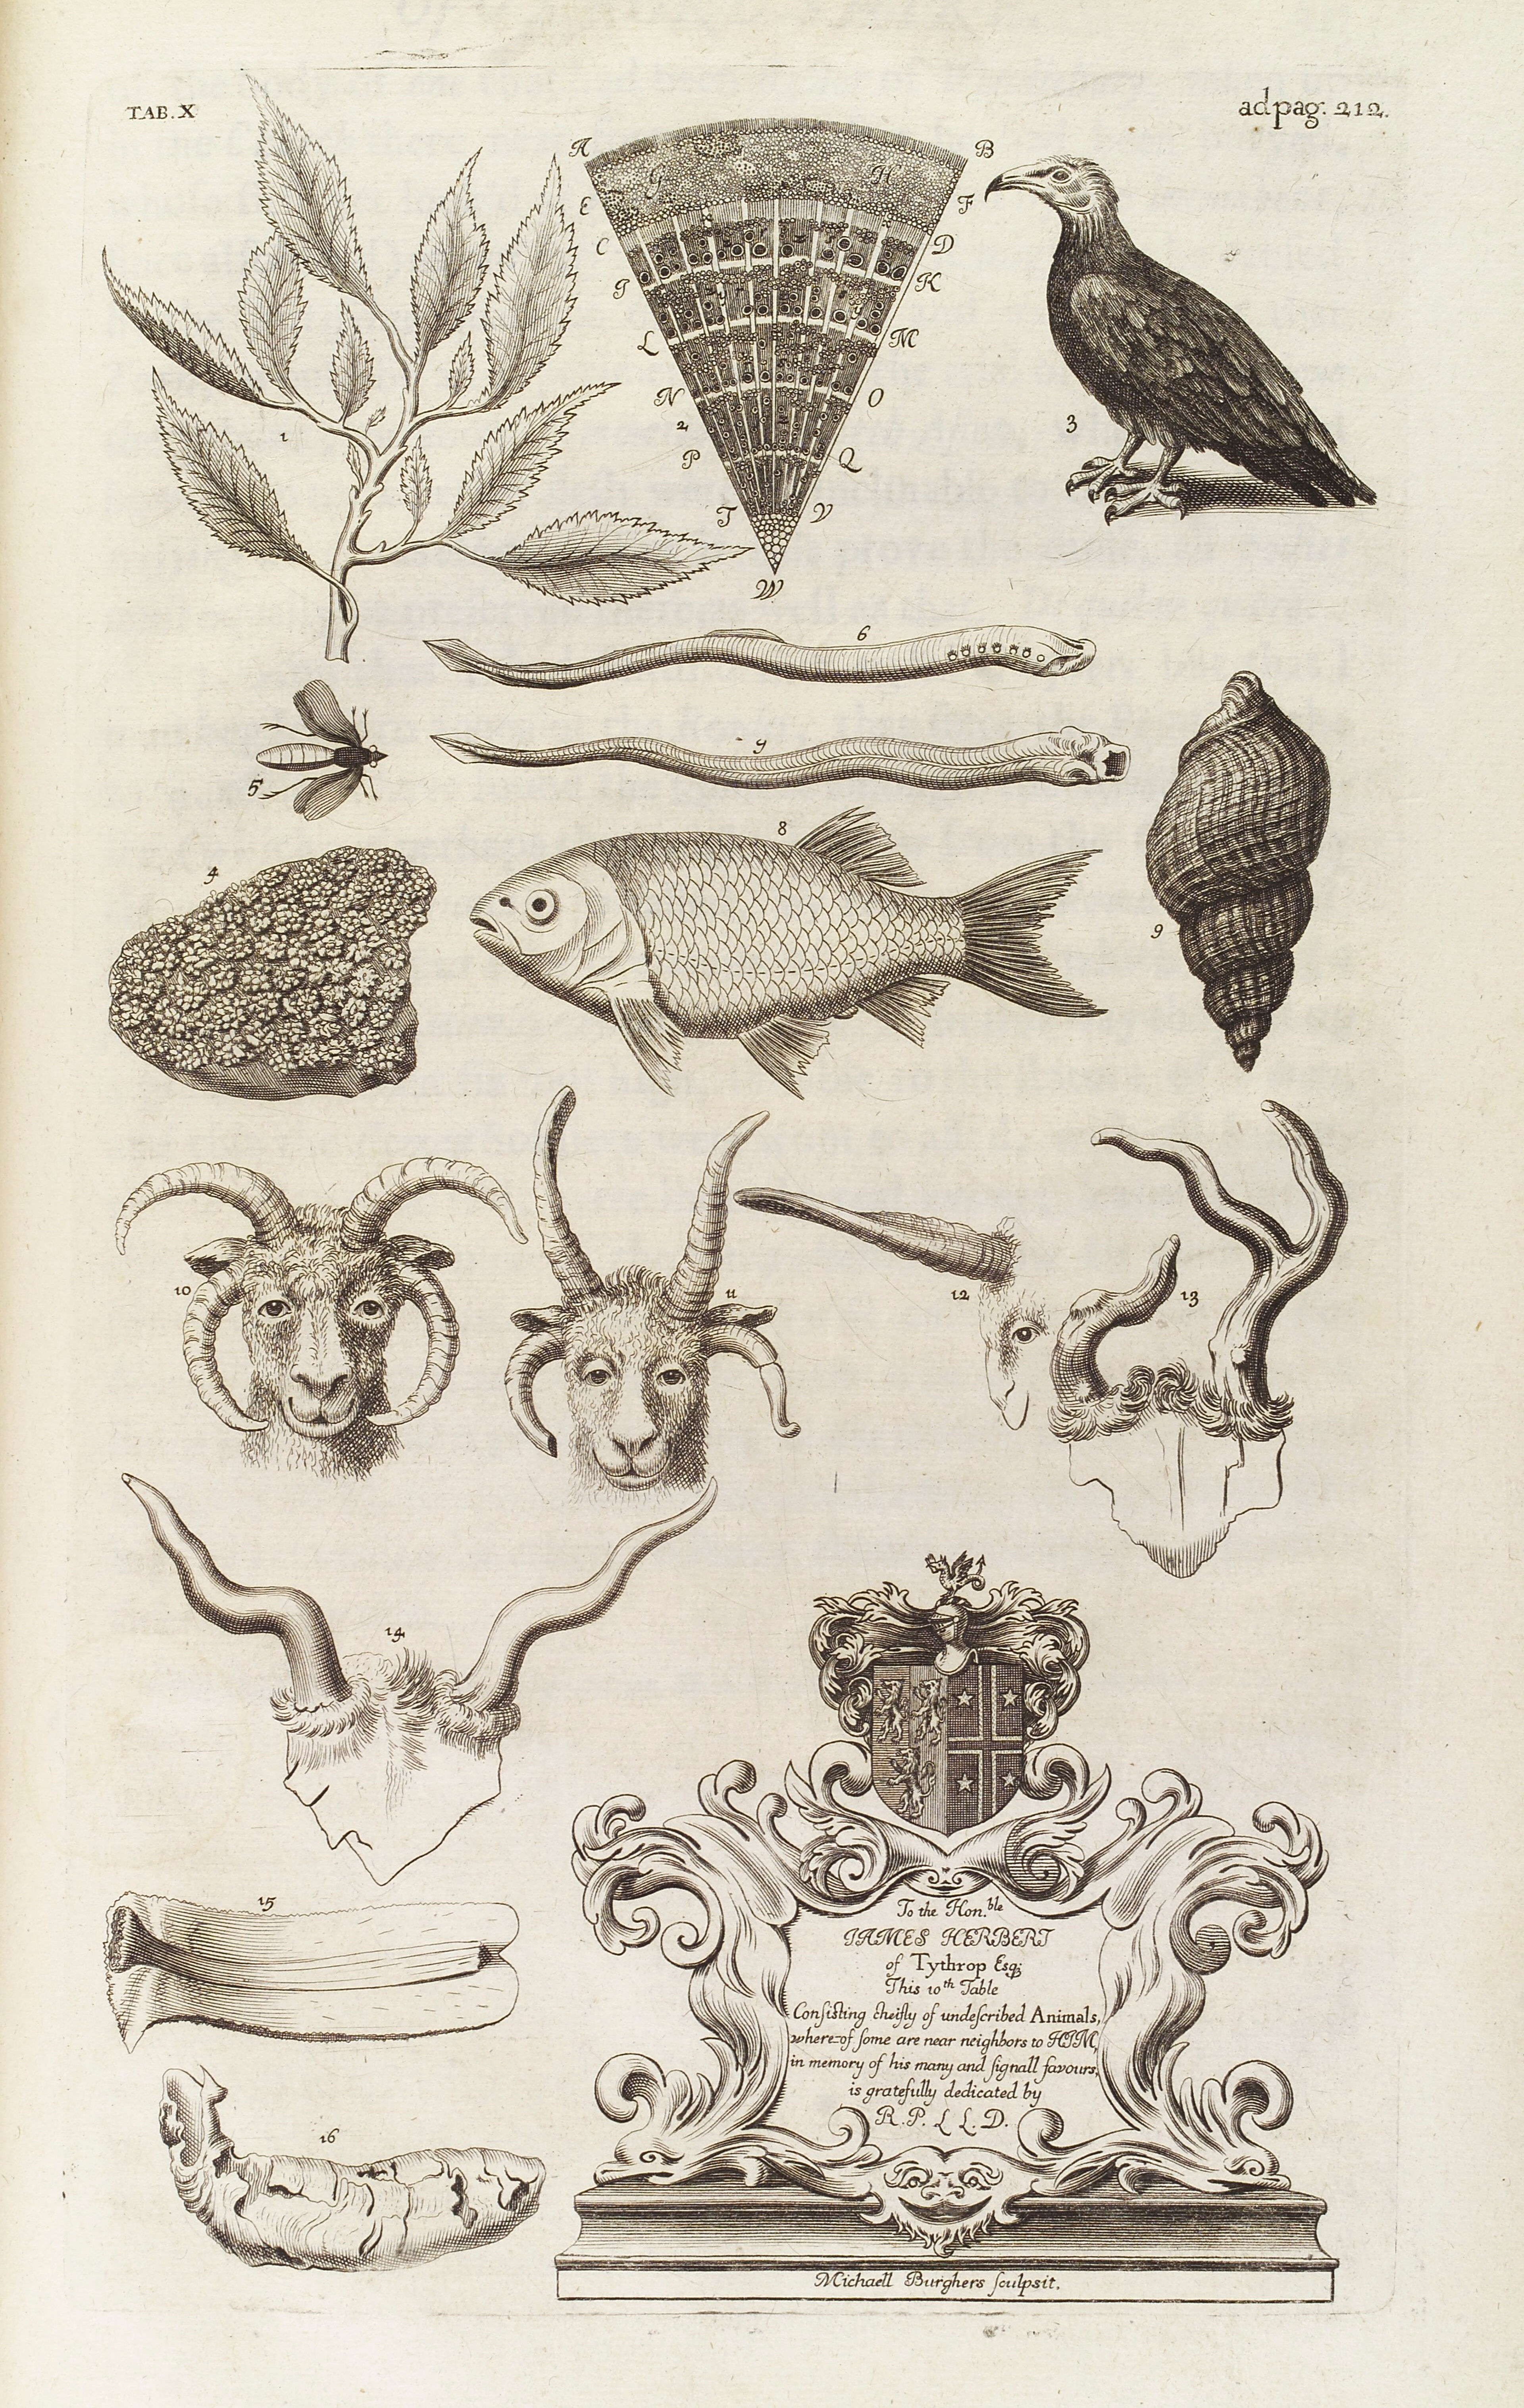 The natural history of Oxford-shire, being an essay toward the natural history of England / By R[ob.] P[lot] LL.D.